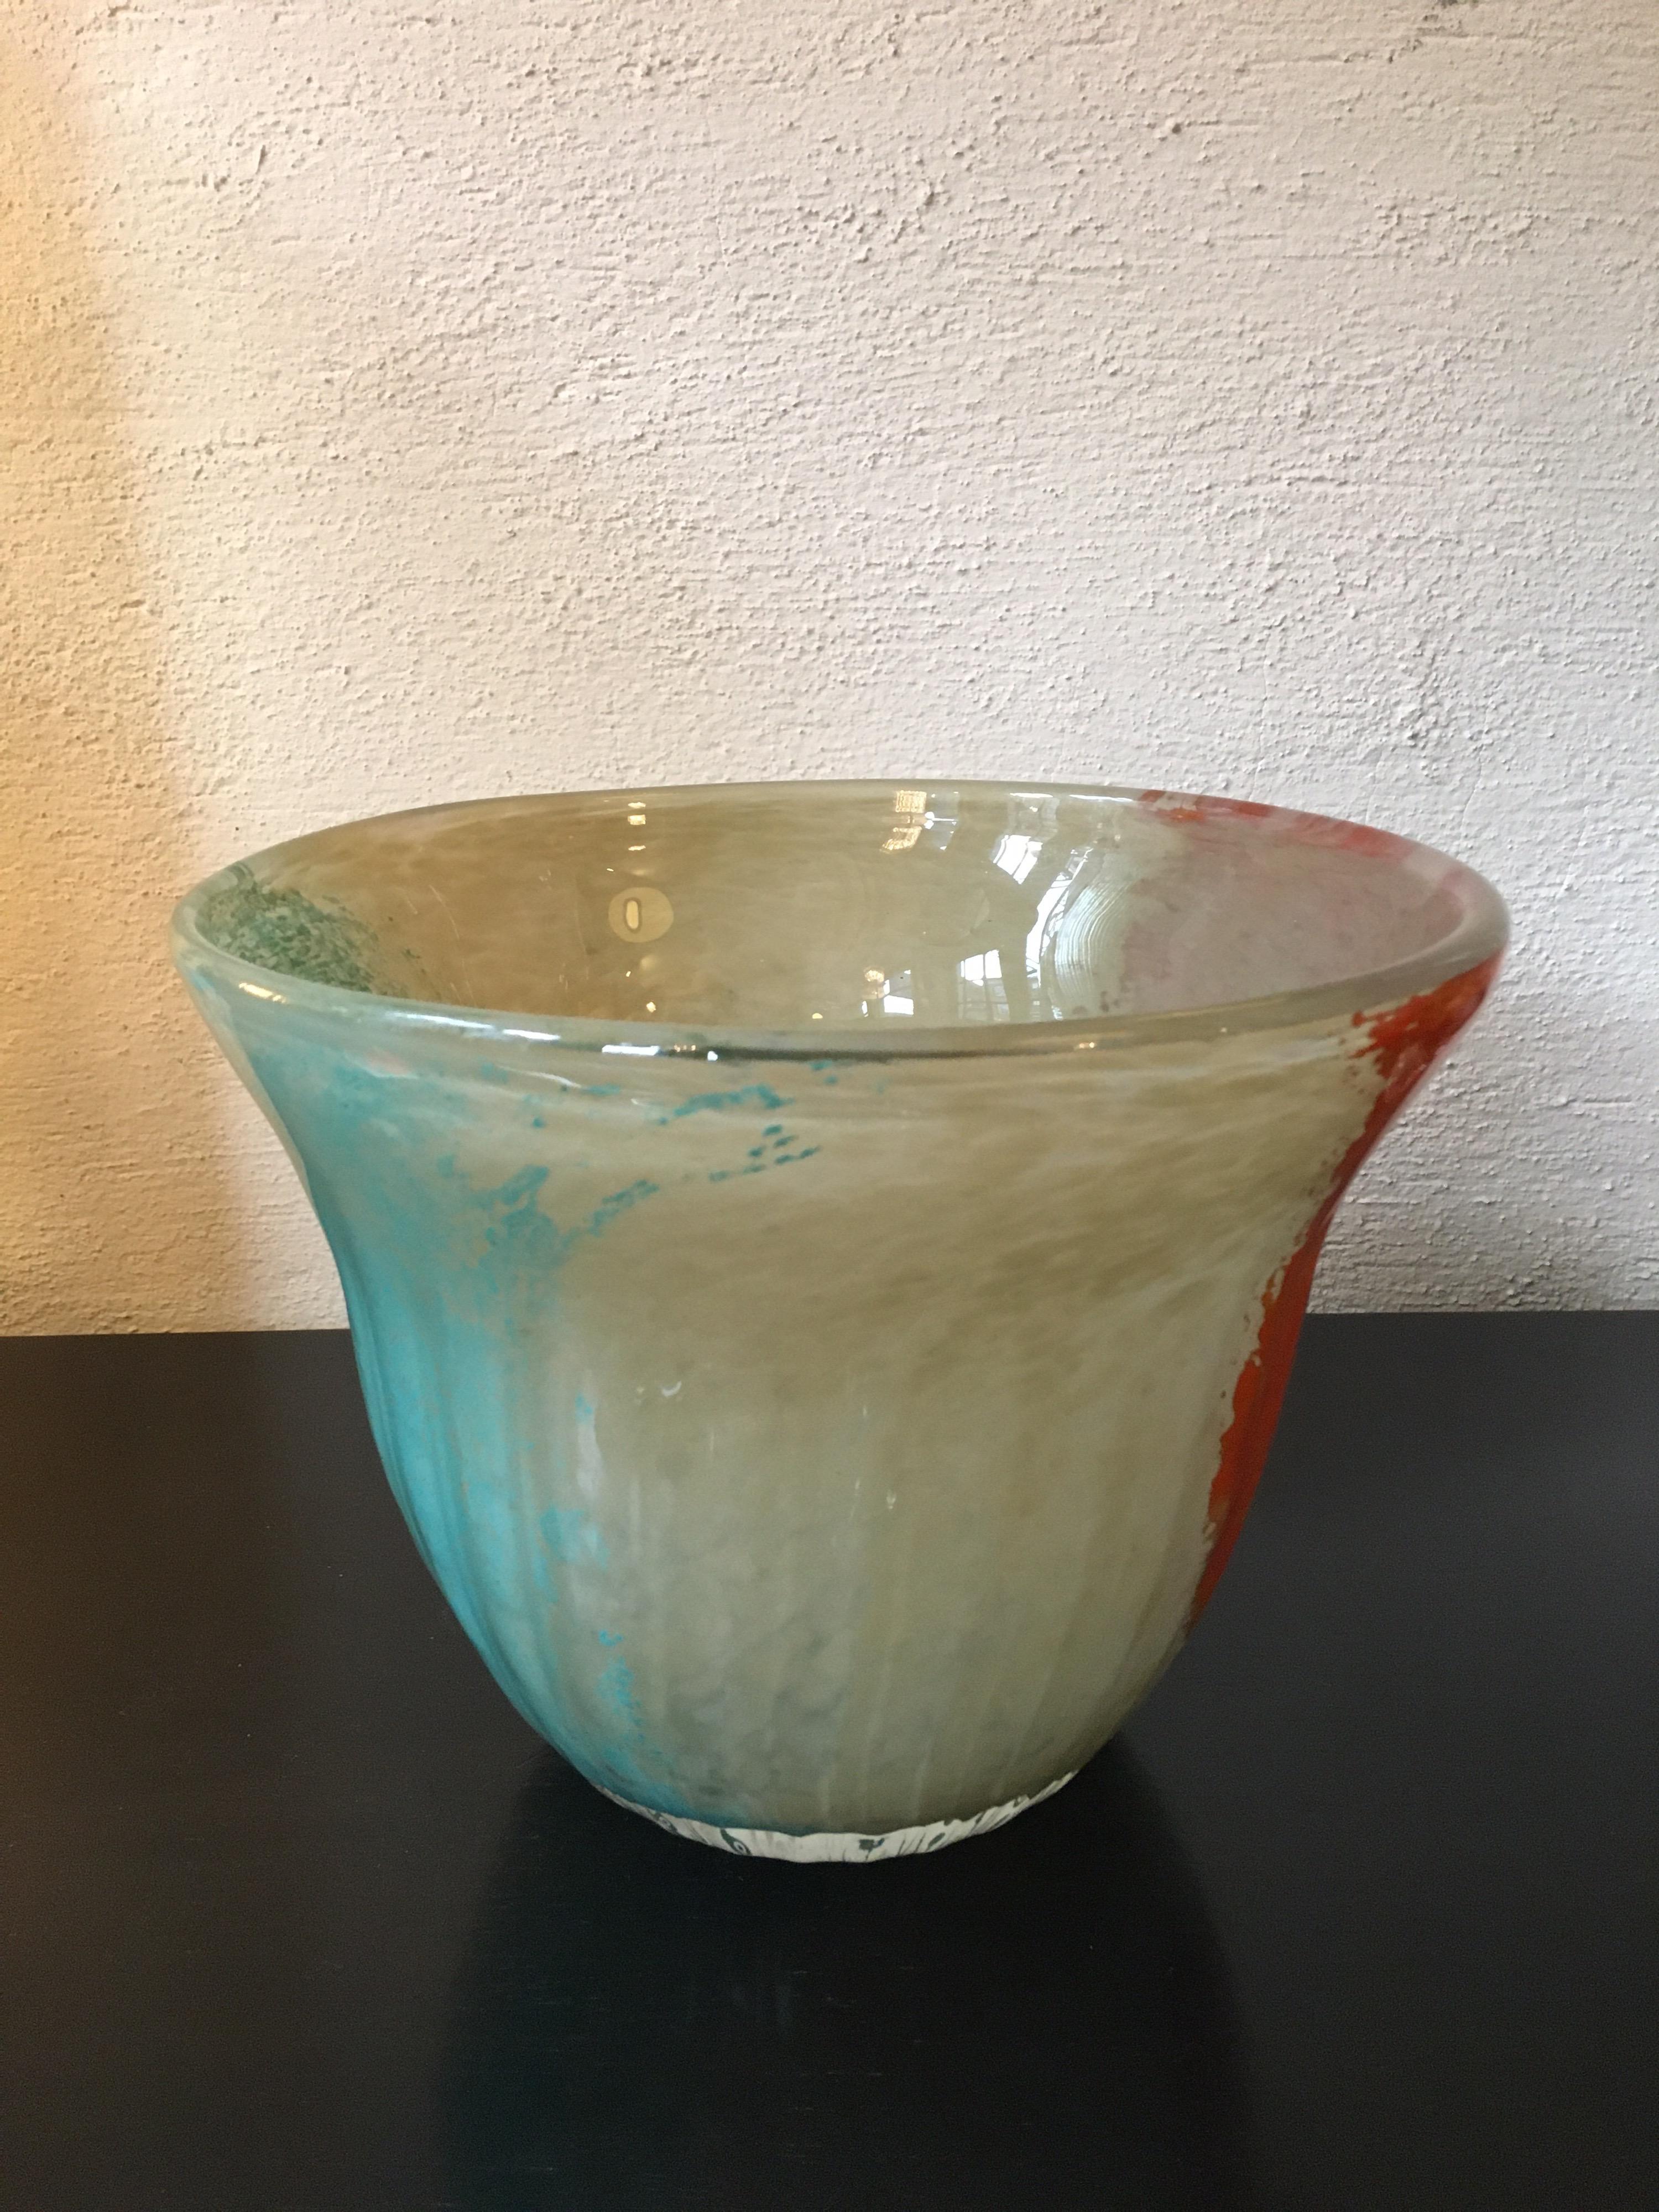 Evolution art glass vase or bowl by Waterford. Bright red and blue over a white glass background. In perfect condition!